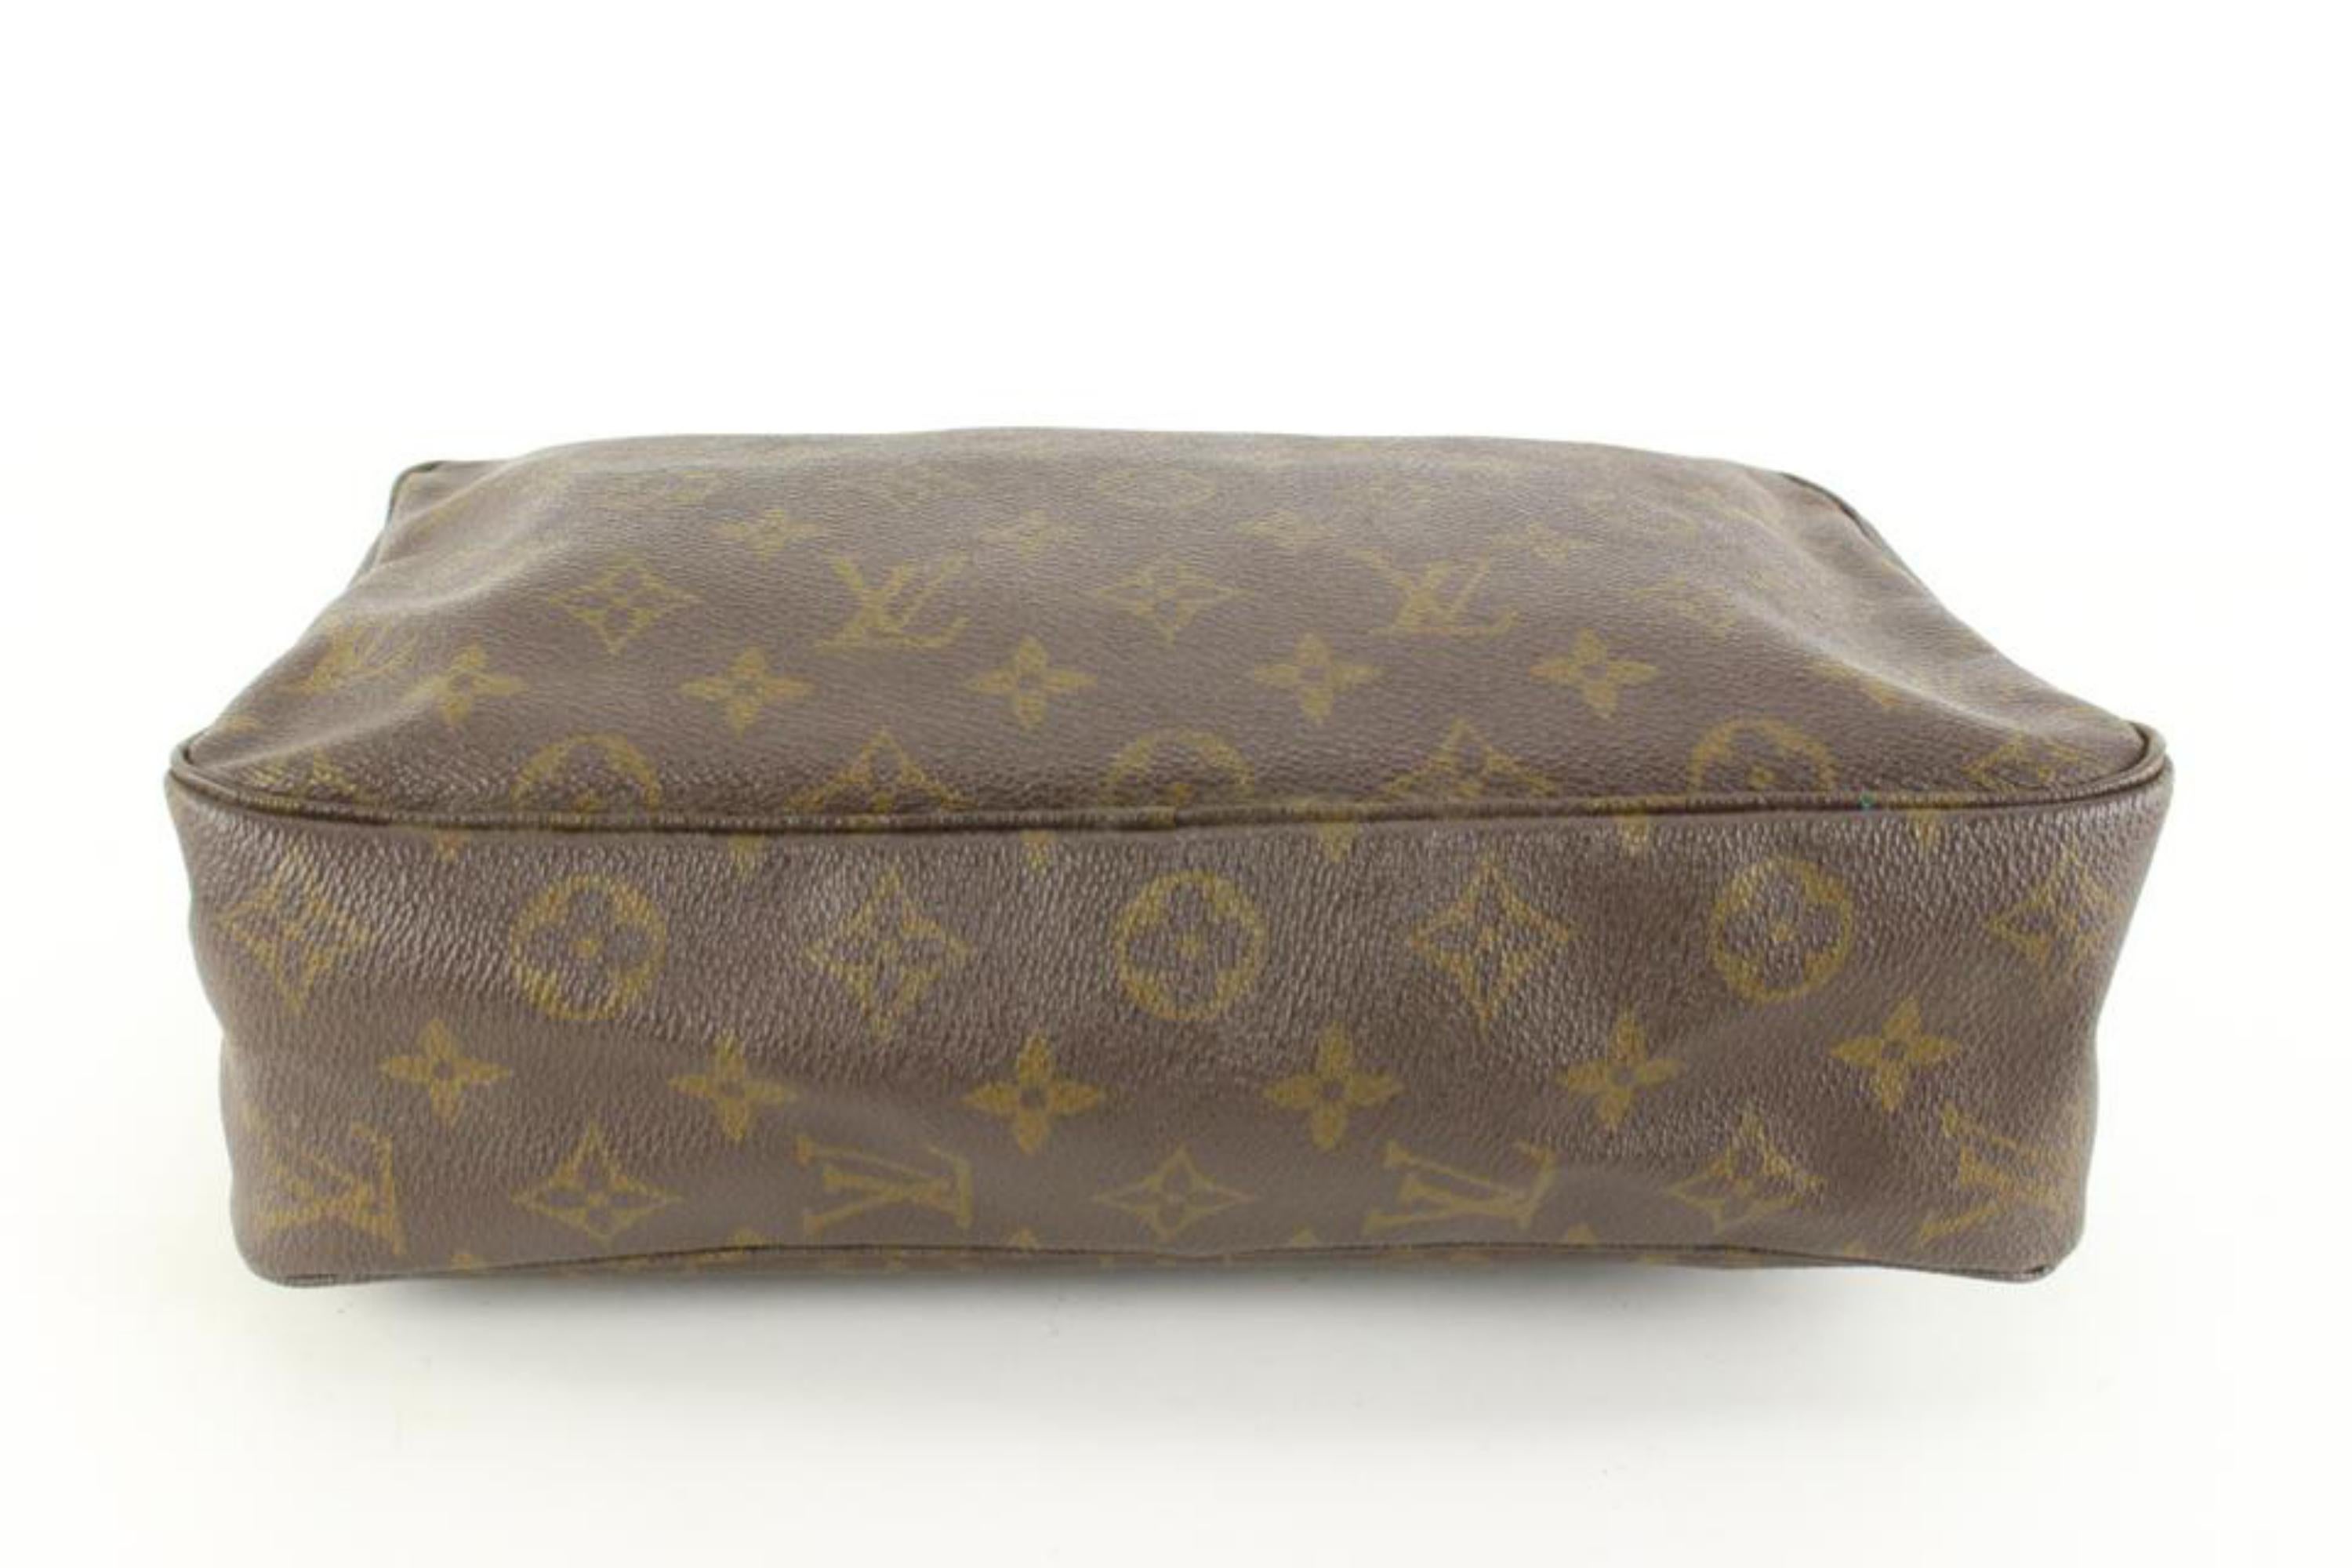 Gray Louis Vuitton Monogram Toiletry Pouch 28 Unisex Travel Make Up Bag 69lk726s For Sale